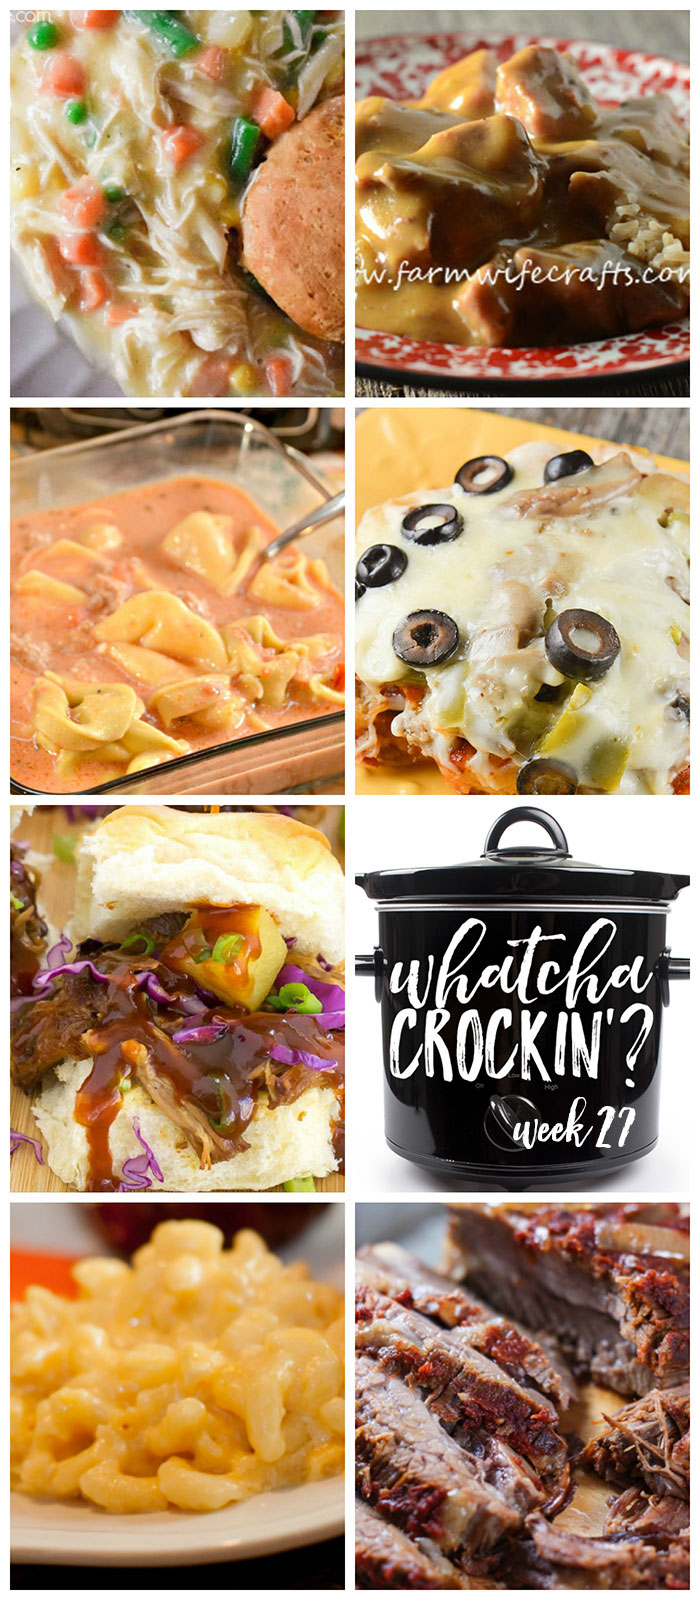 This week's Whatcha Crockin' crock pot recipes include Slow Cooker Beef Stew and Rice, Crock Pot Chicken Pot Pie, Crock Pot Pizza Bake, Slow Cooker Beef Brisket, Crock Pot Mac 'n Cheese, Crock Pot Sausage Tortellini Soup, Crock Pot Pineapple Char Sui Pulled Pork and much more!